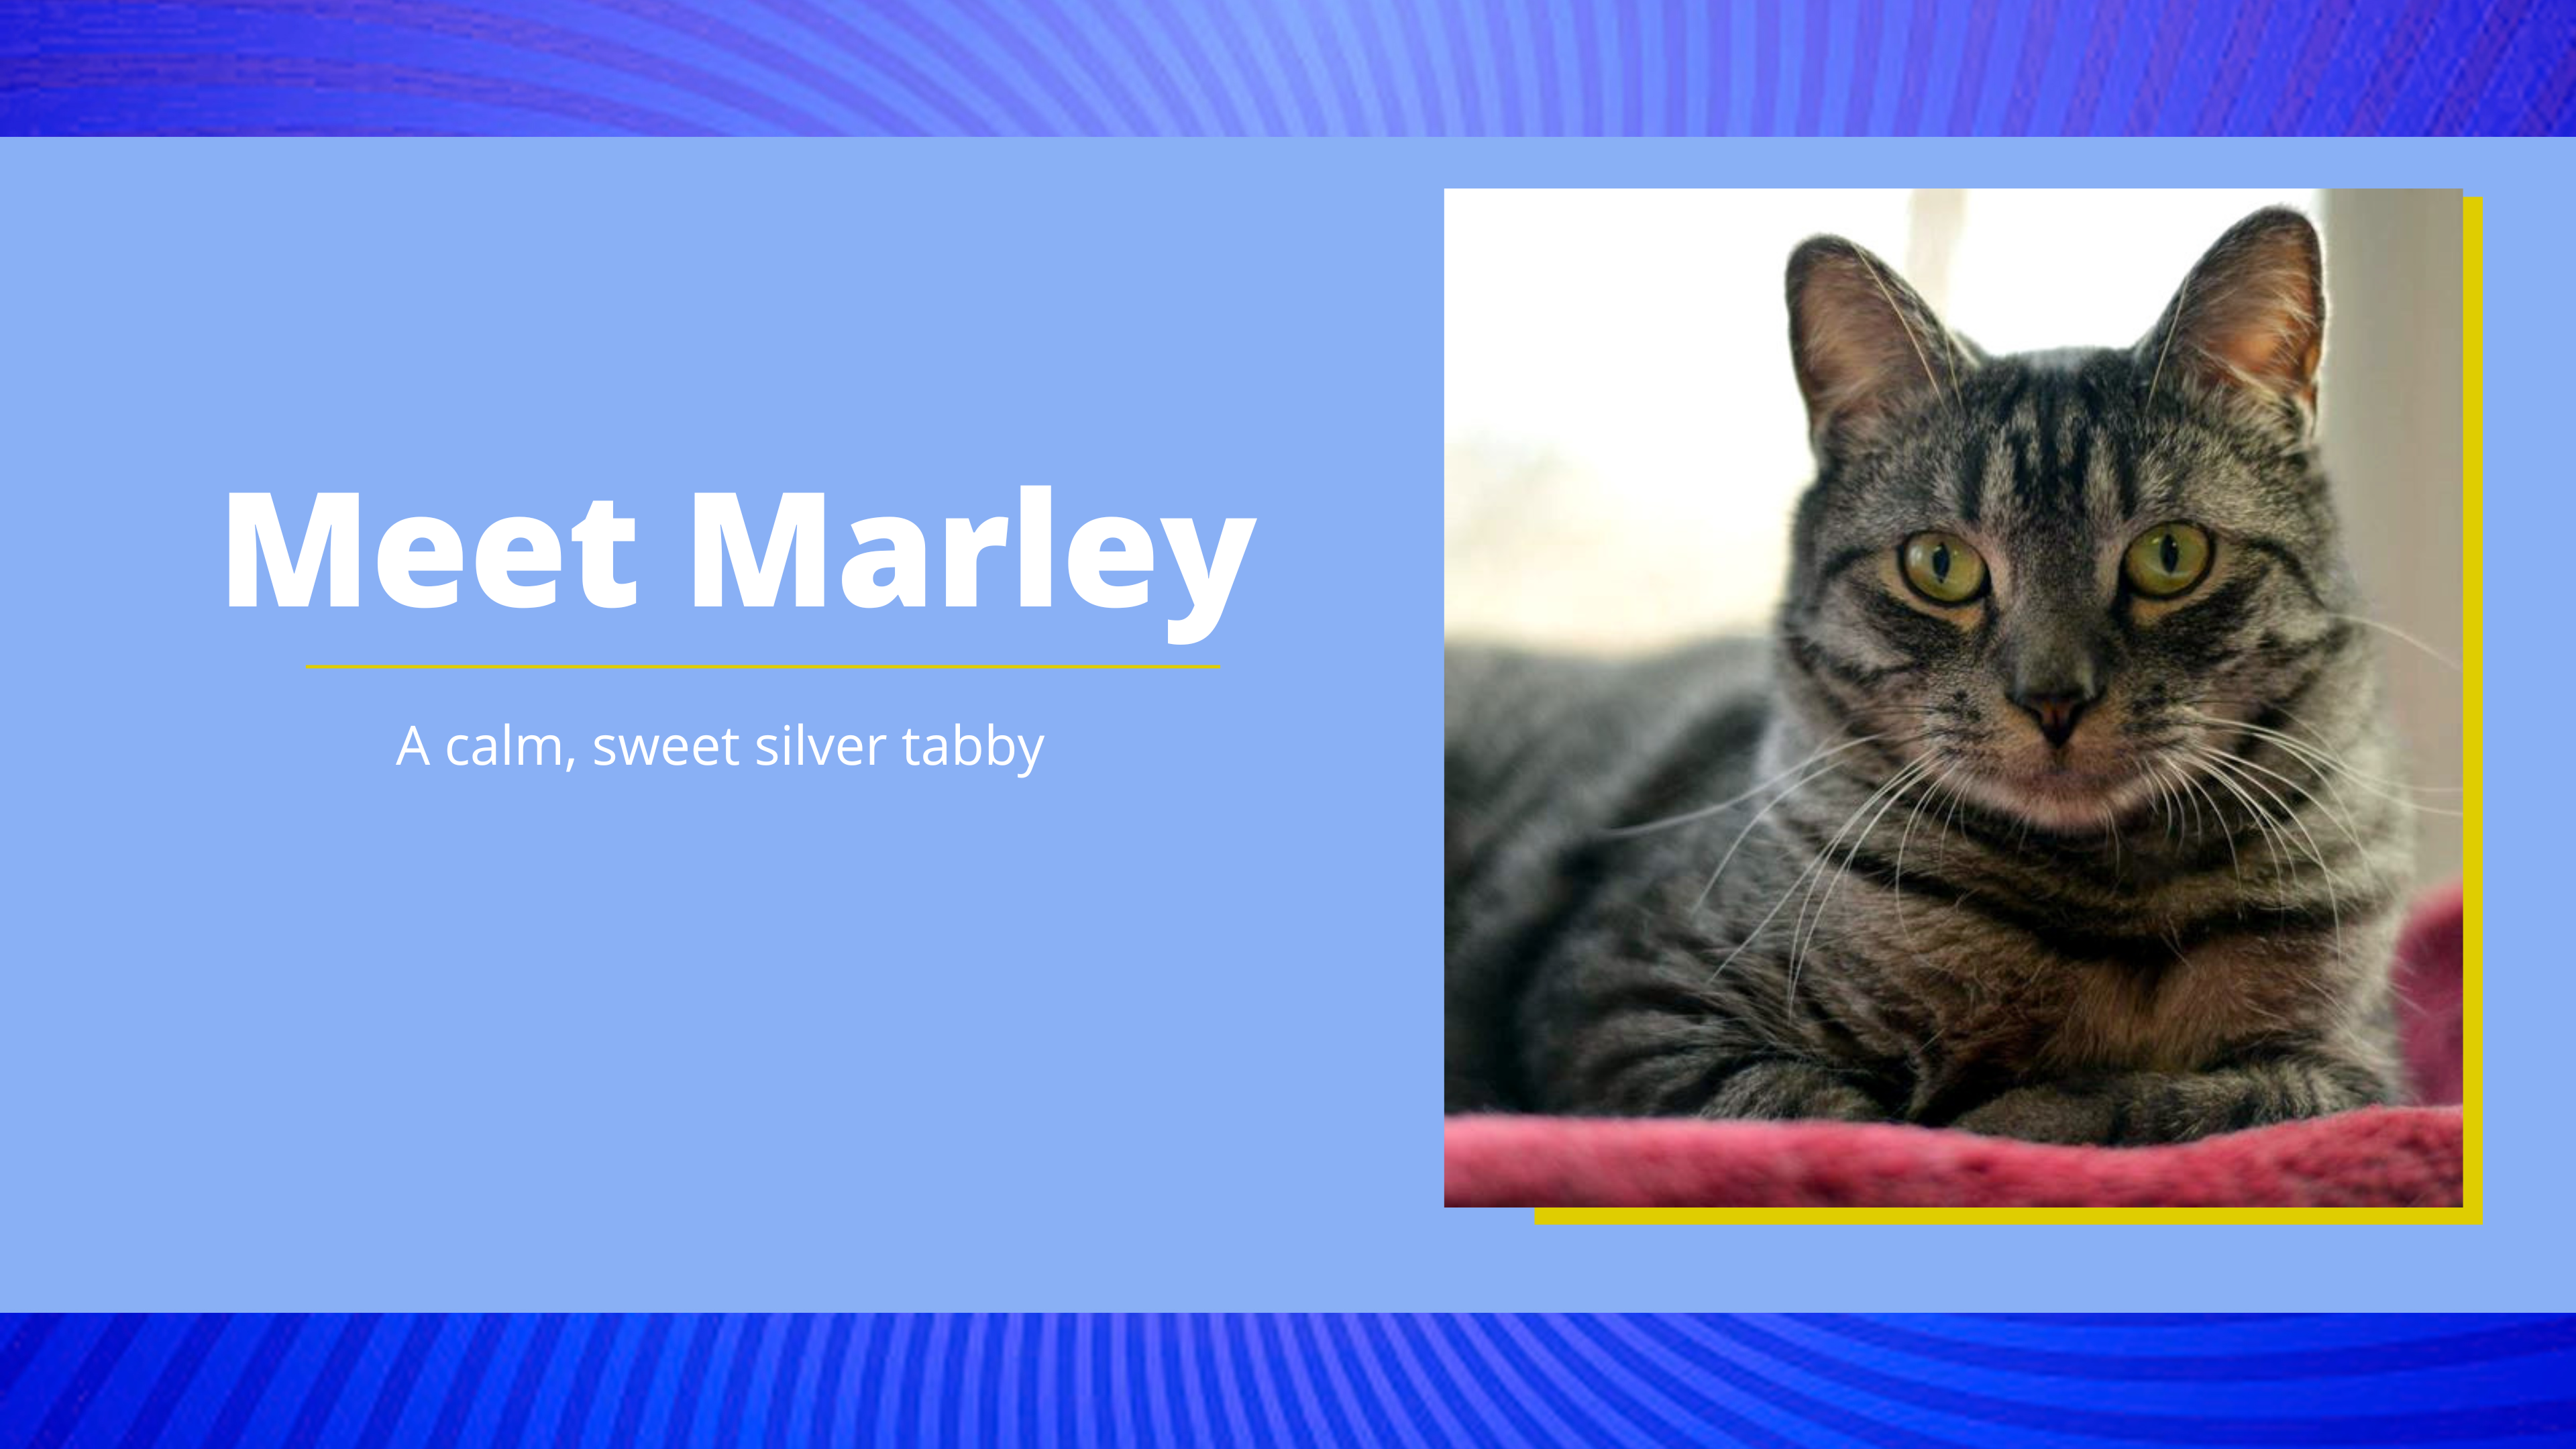 Marley is a silver tabby cat and is available for adoption in Beacon